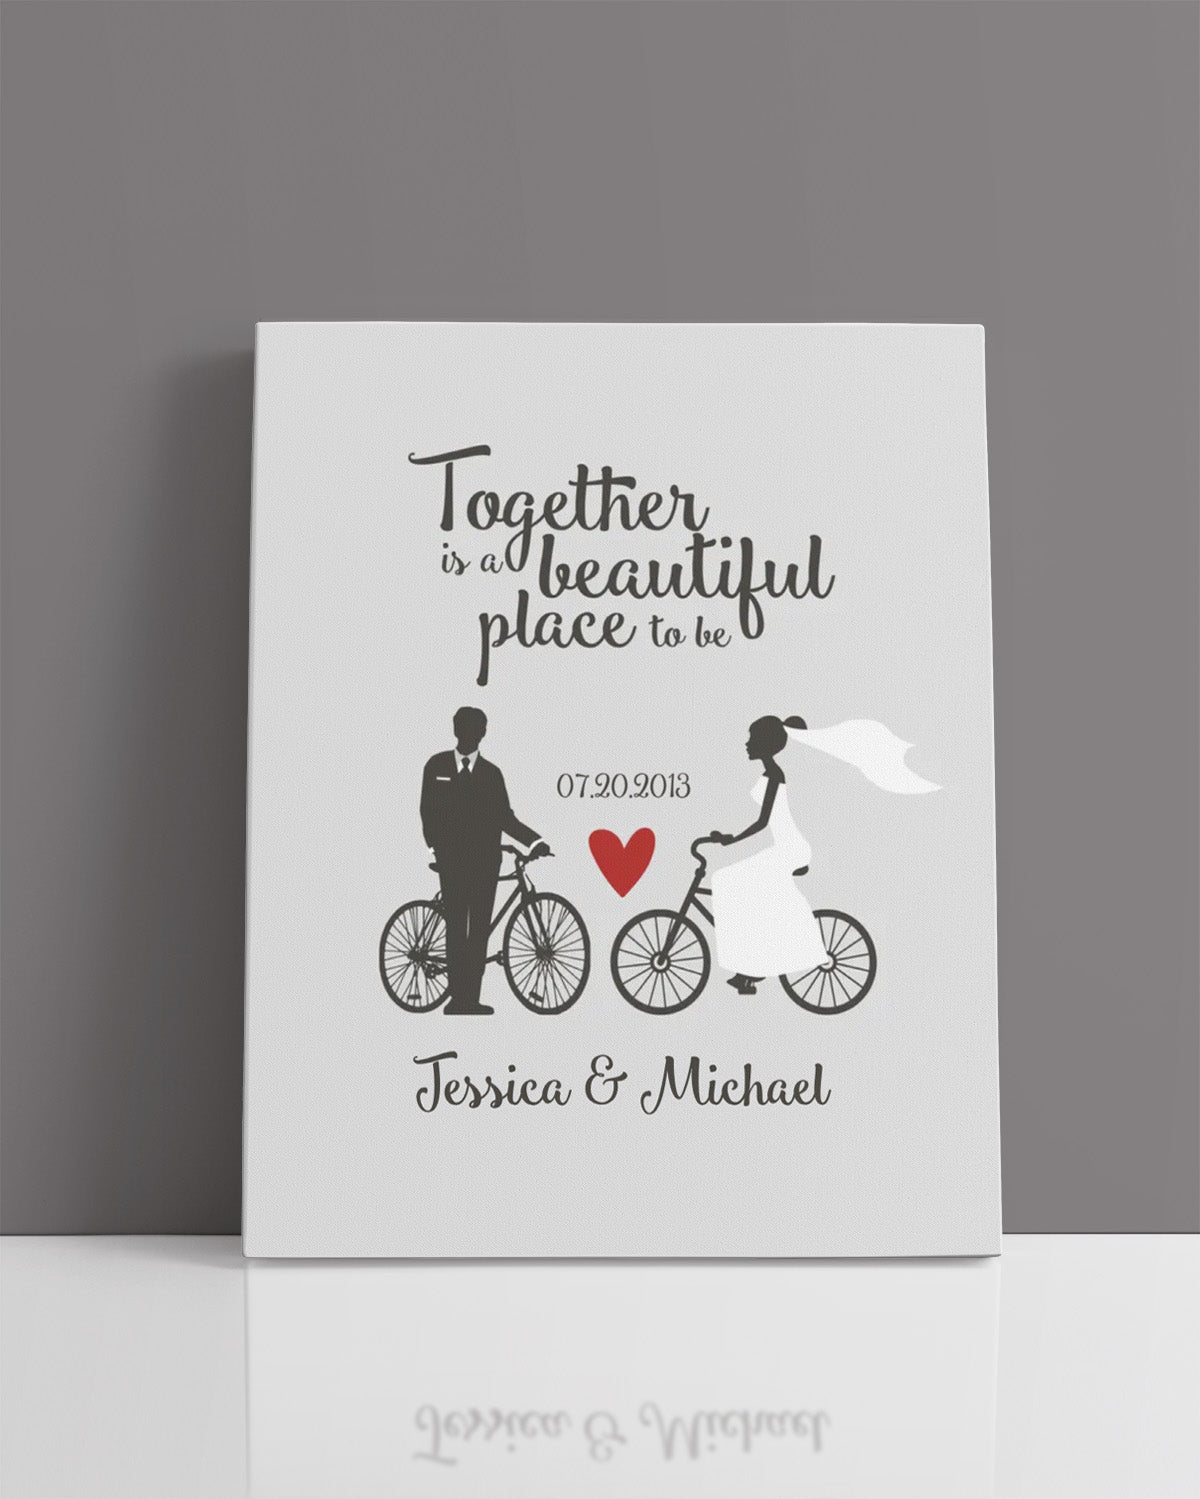 Together Is A Beautiful Place To Be - Customizable Wall Decor Canvas Art for cycling fans on a light gray background - Great gift for a wedding or anniversary